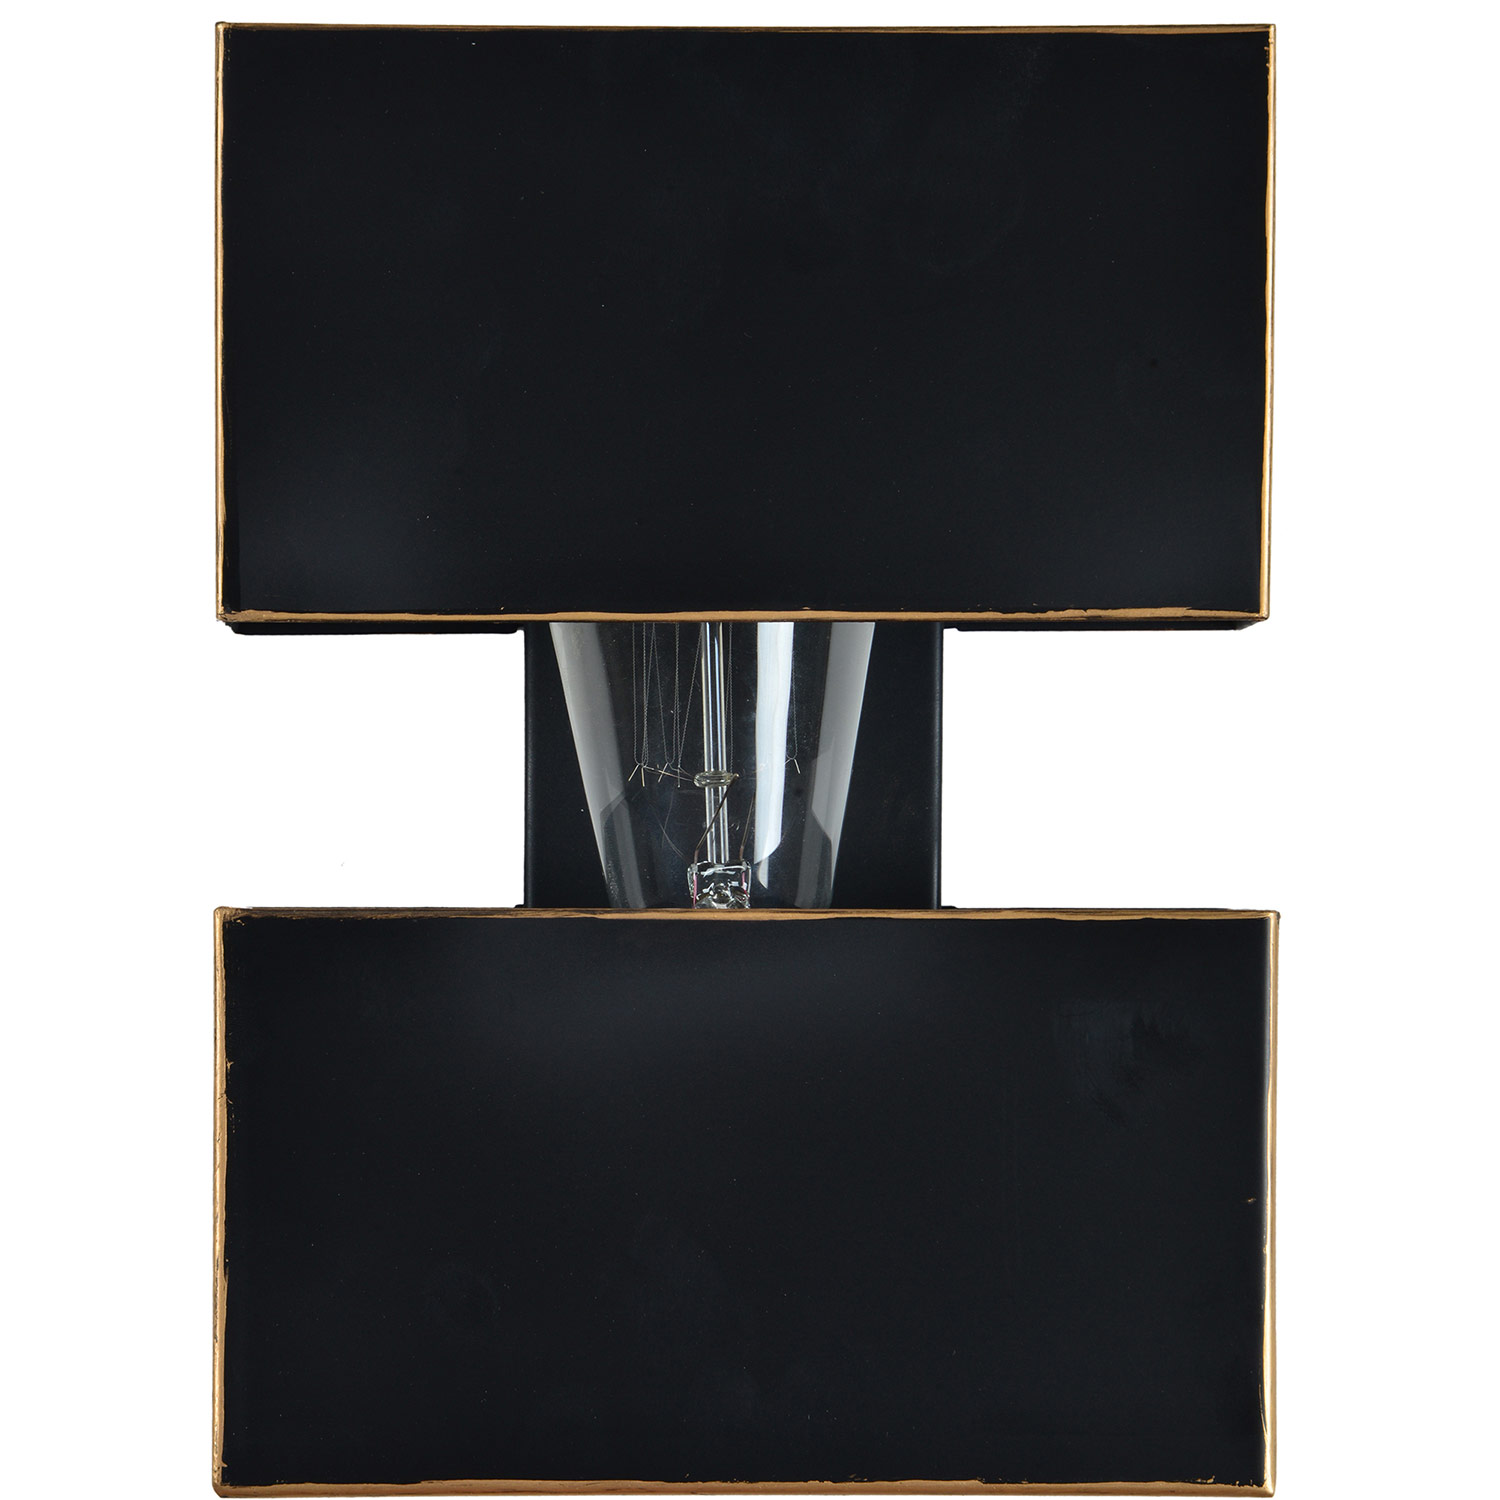 Ren-Wil Trudy Wall Sconce - Oil Rubbed Bronze